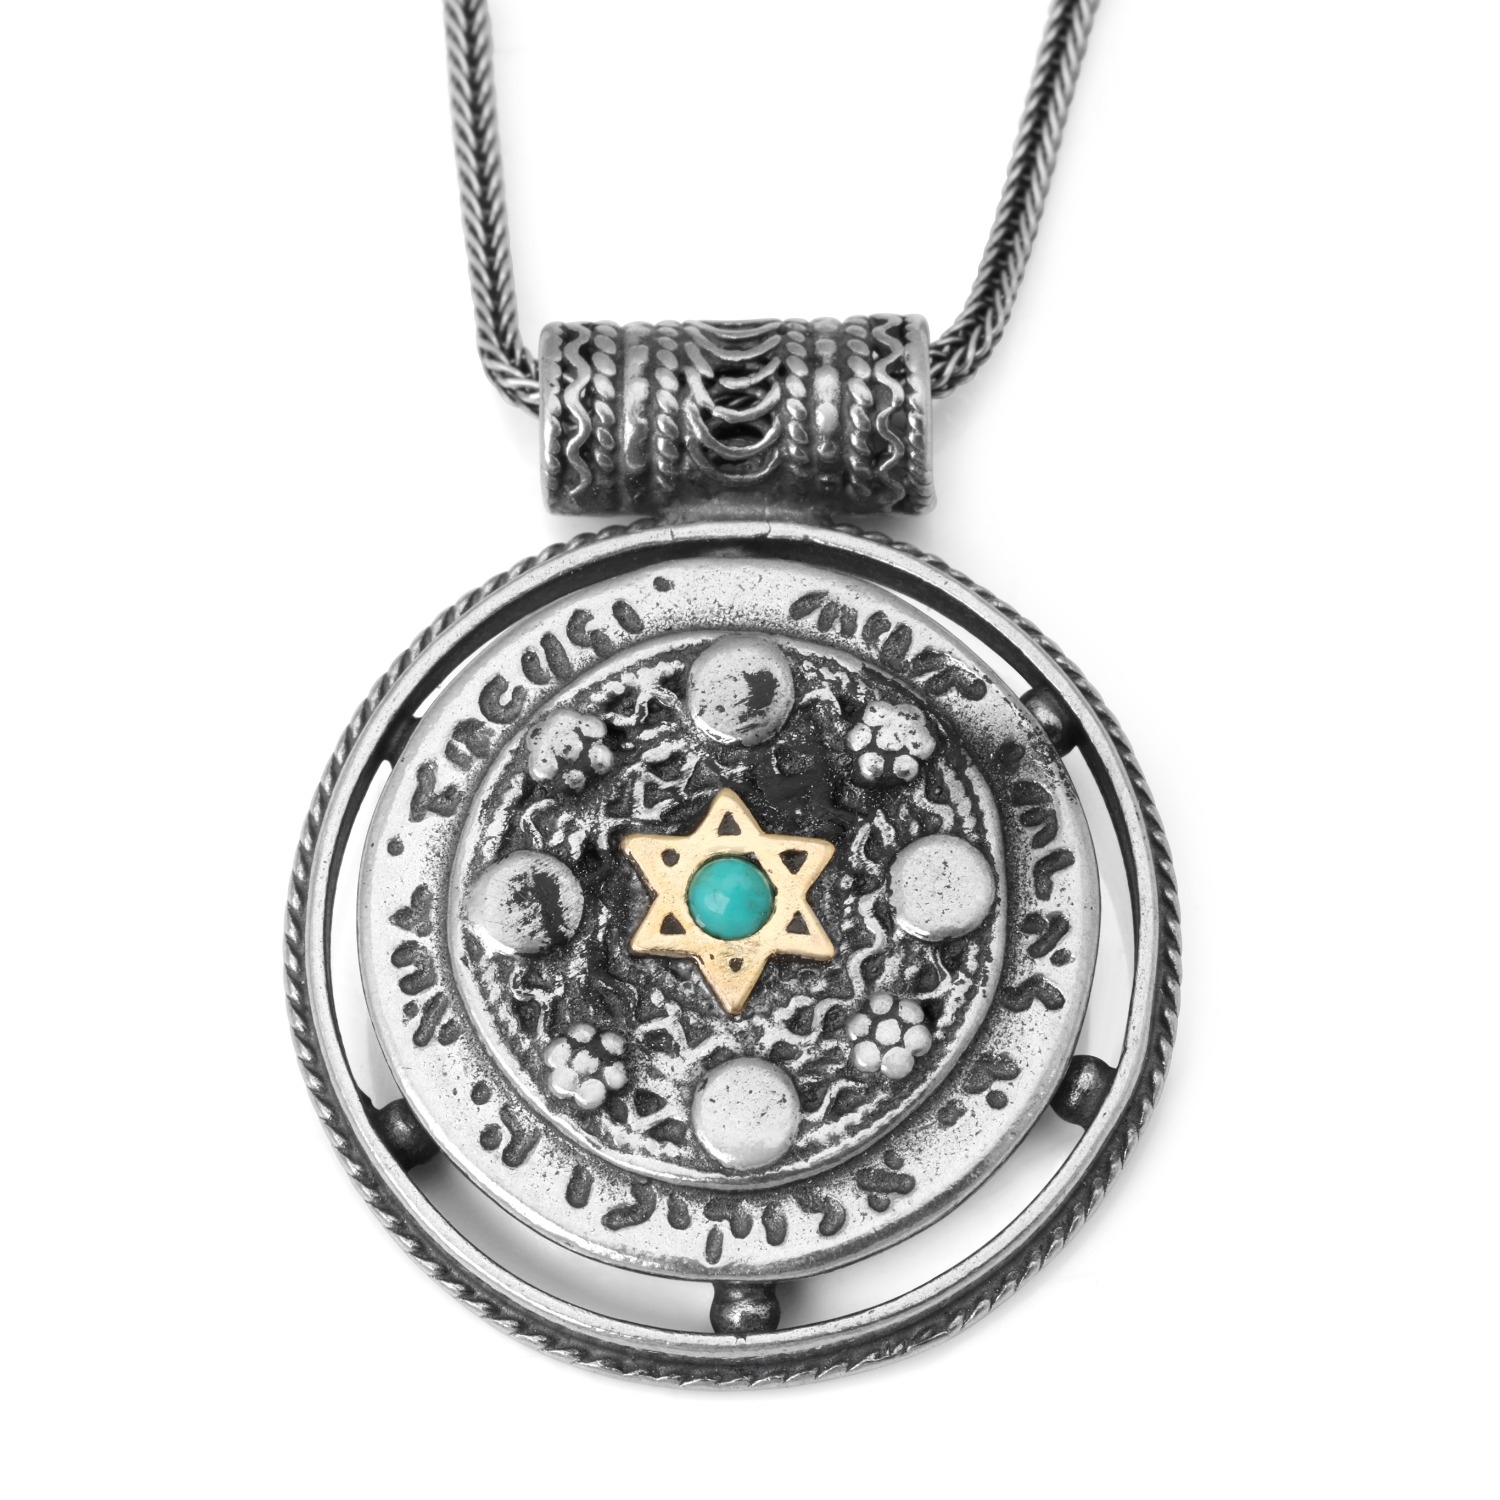 Shema Israel: Ornate Multi-Frame Silver Necklace with Gold Star of David - 1